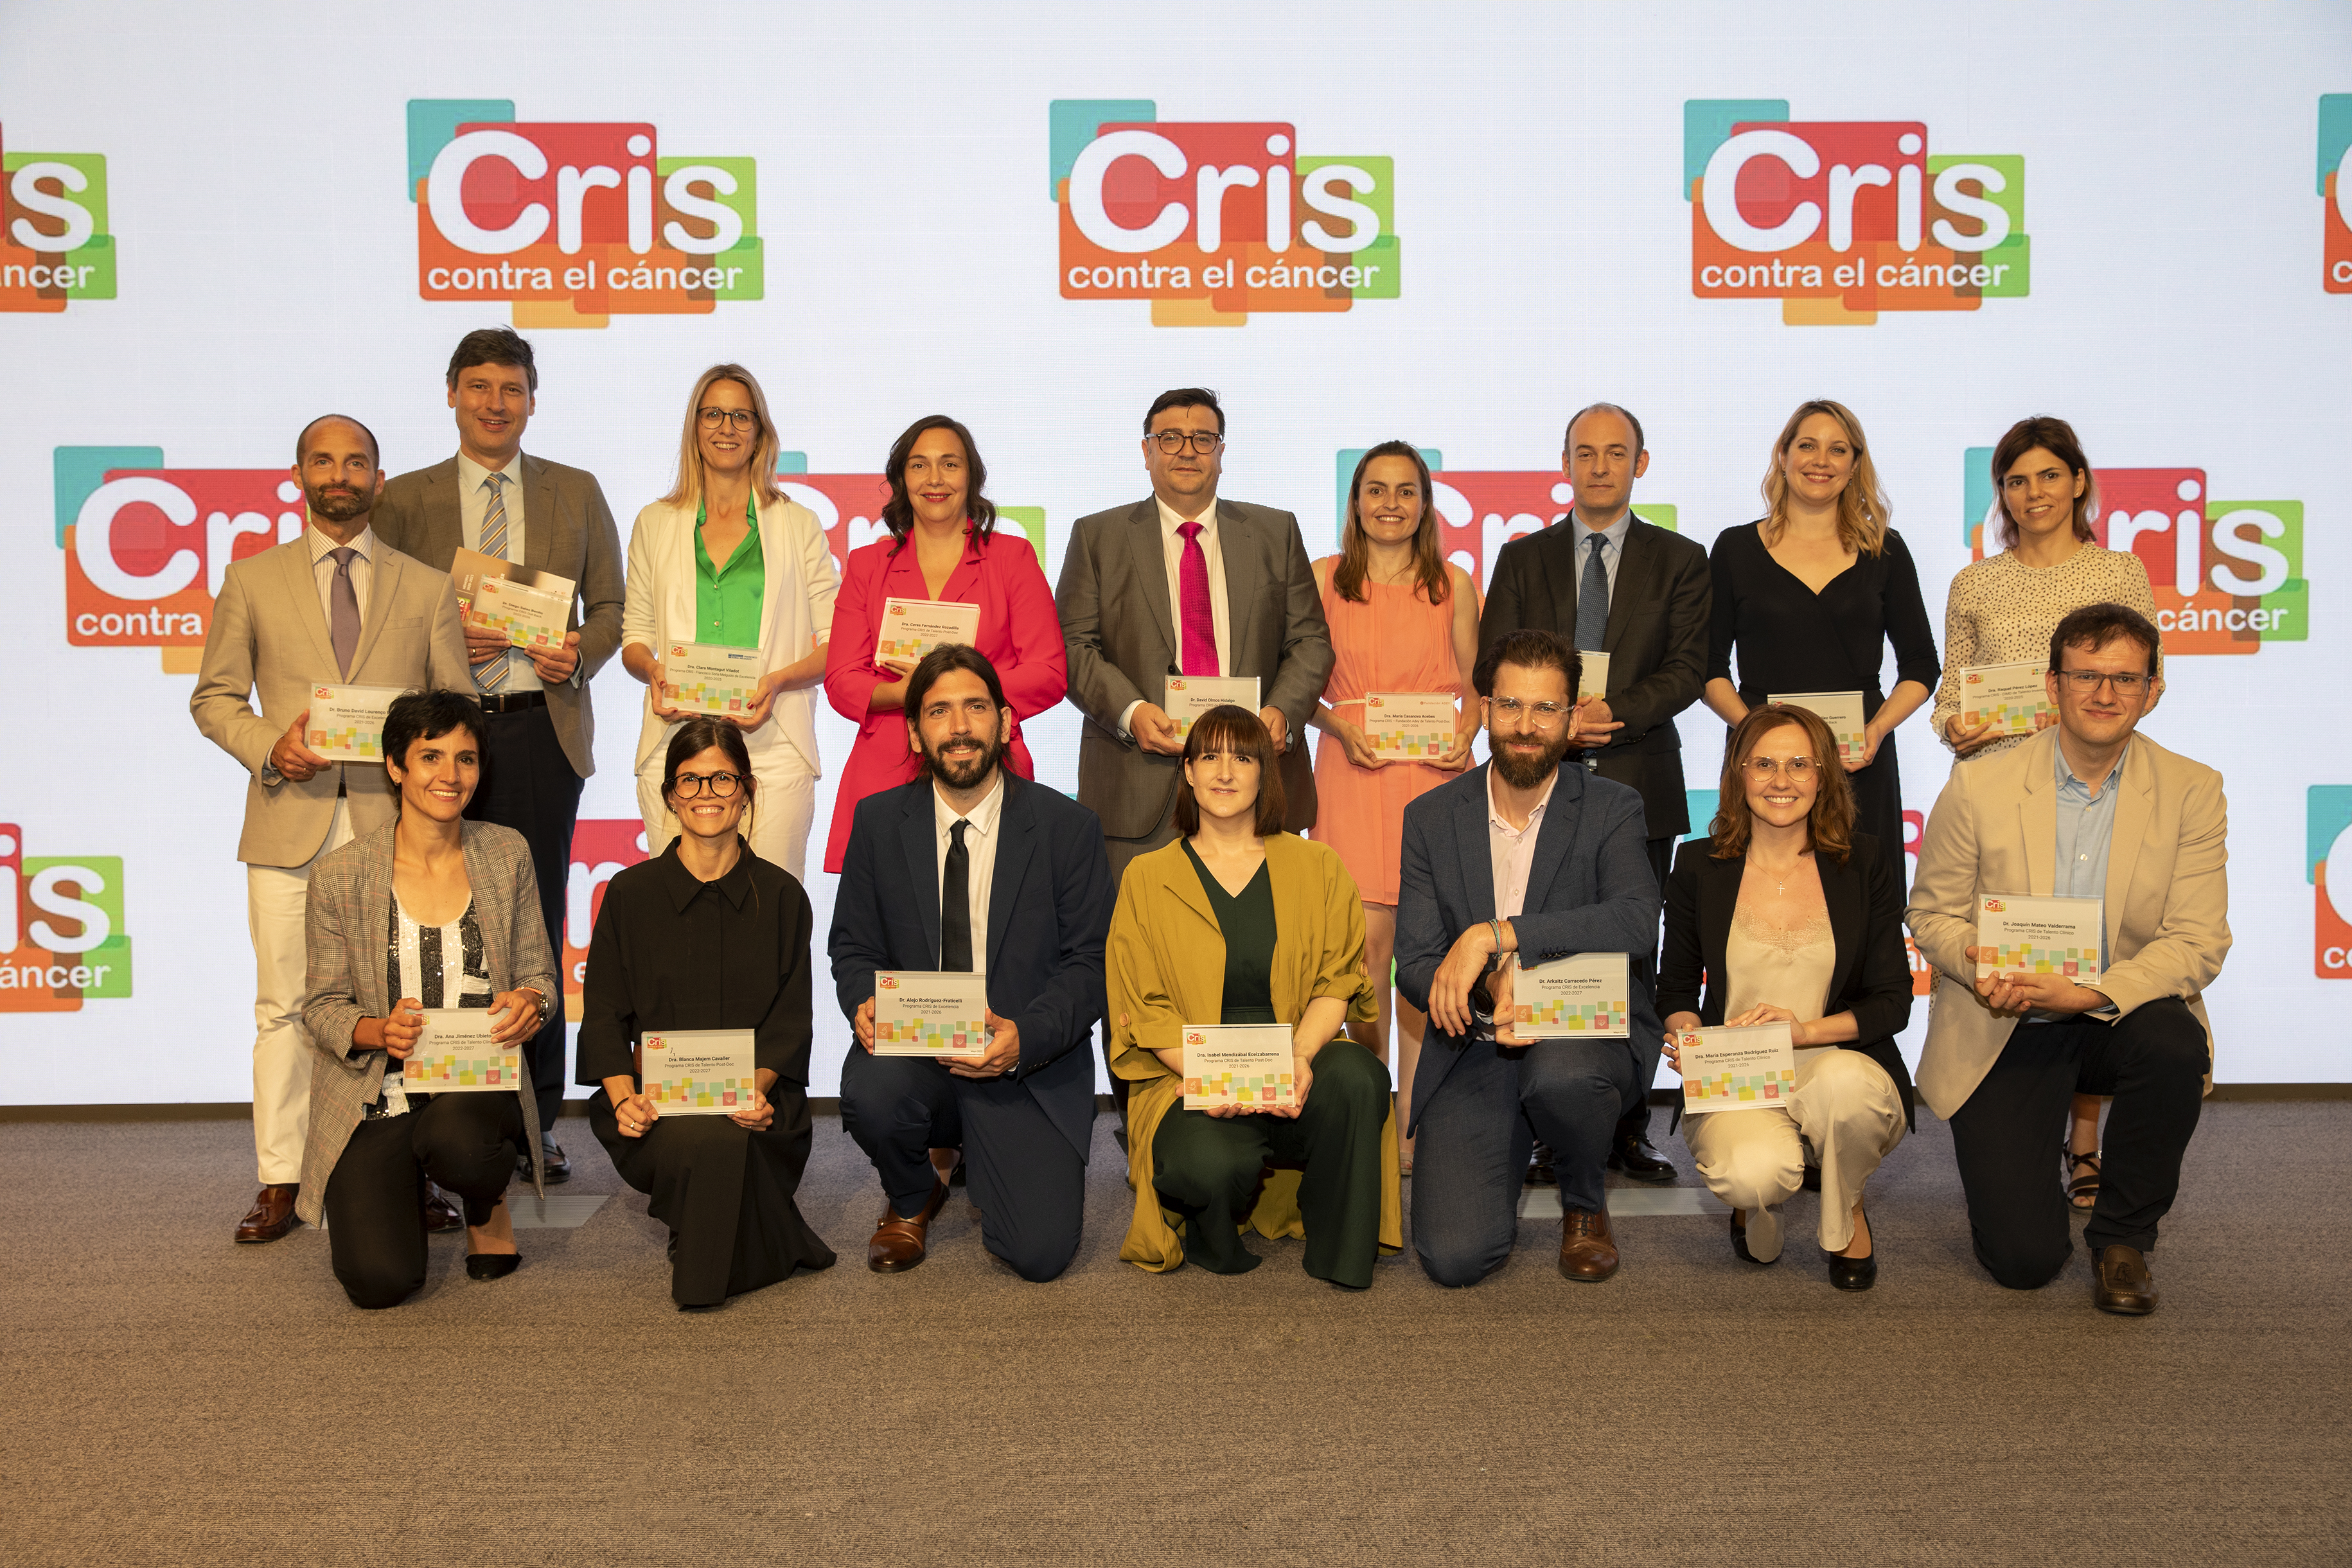 CRIS Cancer delivers the CRIS Programs to 17 outstanding researchers with an endowment of 11 million euros for 5 years